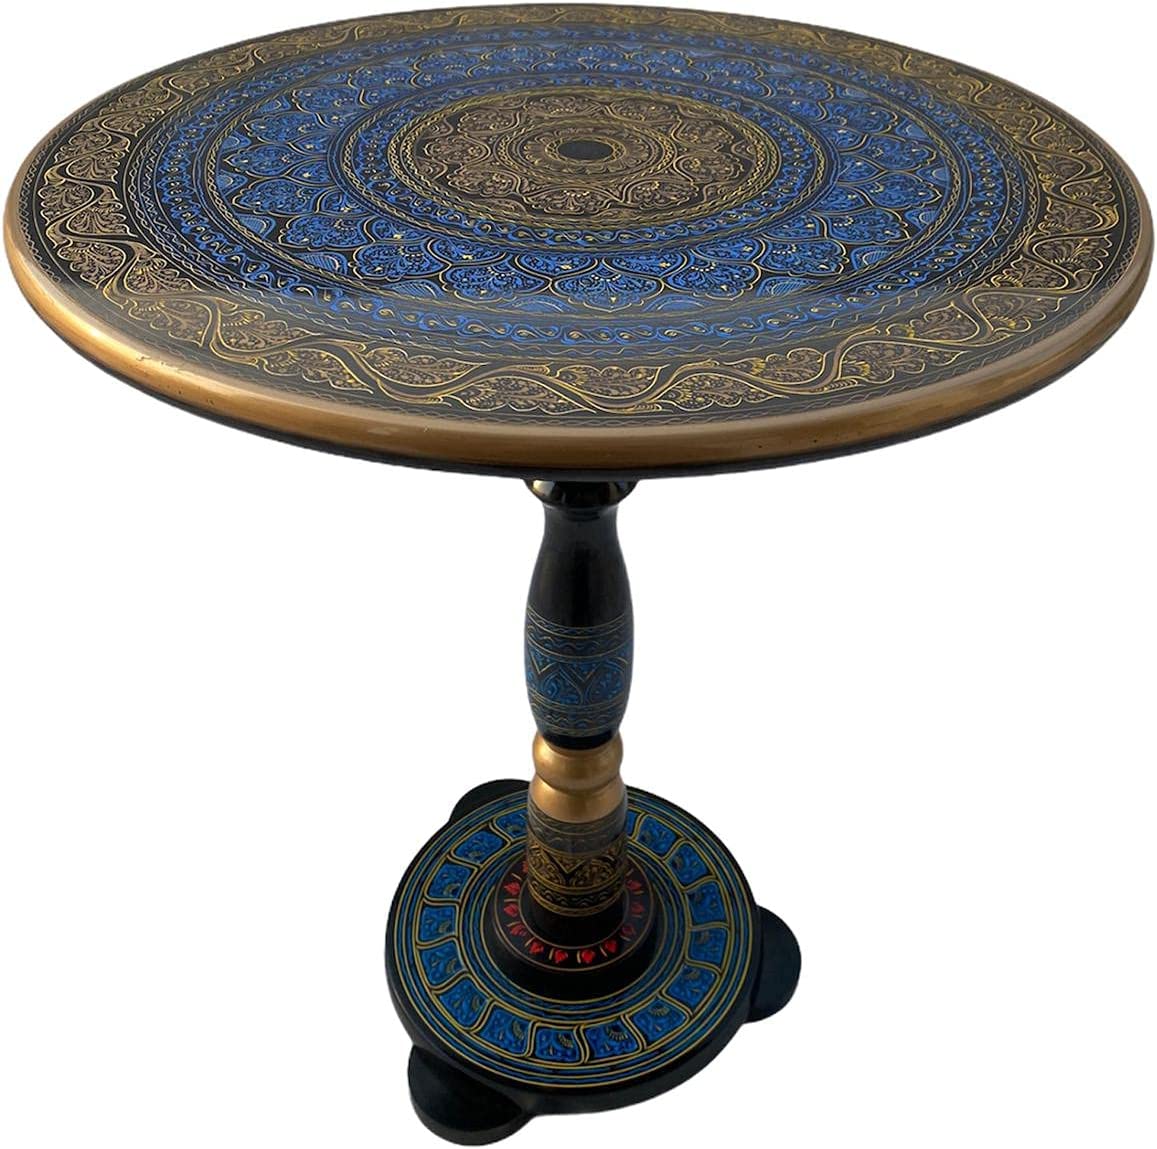 Blue and Golden Lacquer Art Table - 18 inch I Handcrafted Round Table for Living Room or End Table for Bedroom Beautiful Gift for Home Invitations I Nakshi Art I  (Aqua Gold)